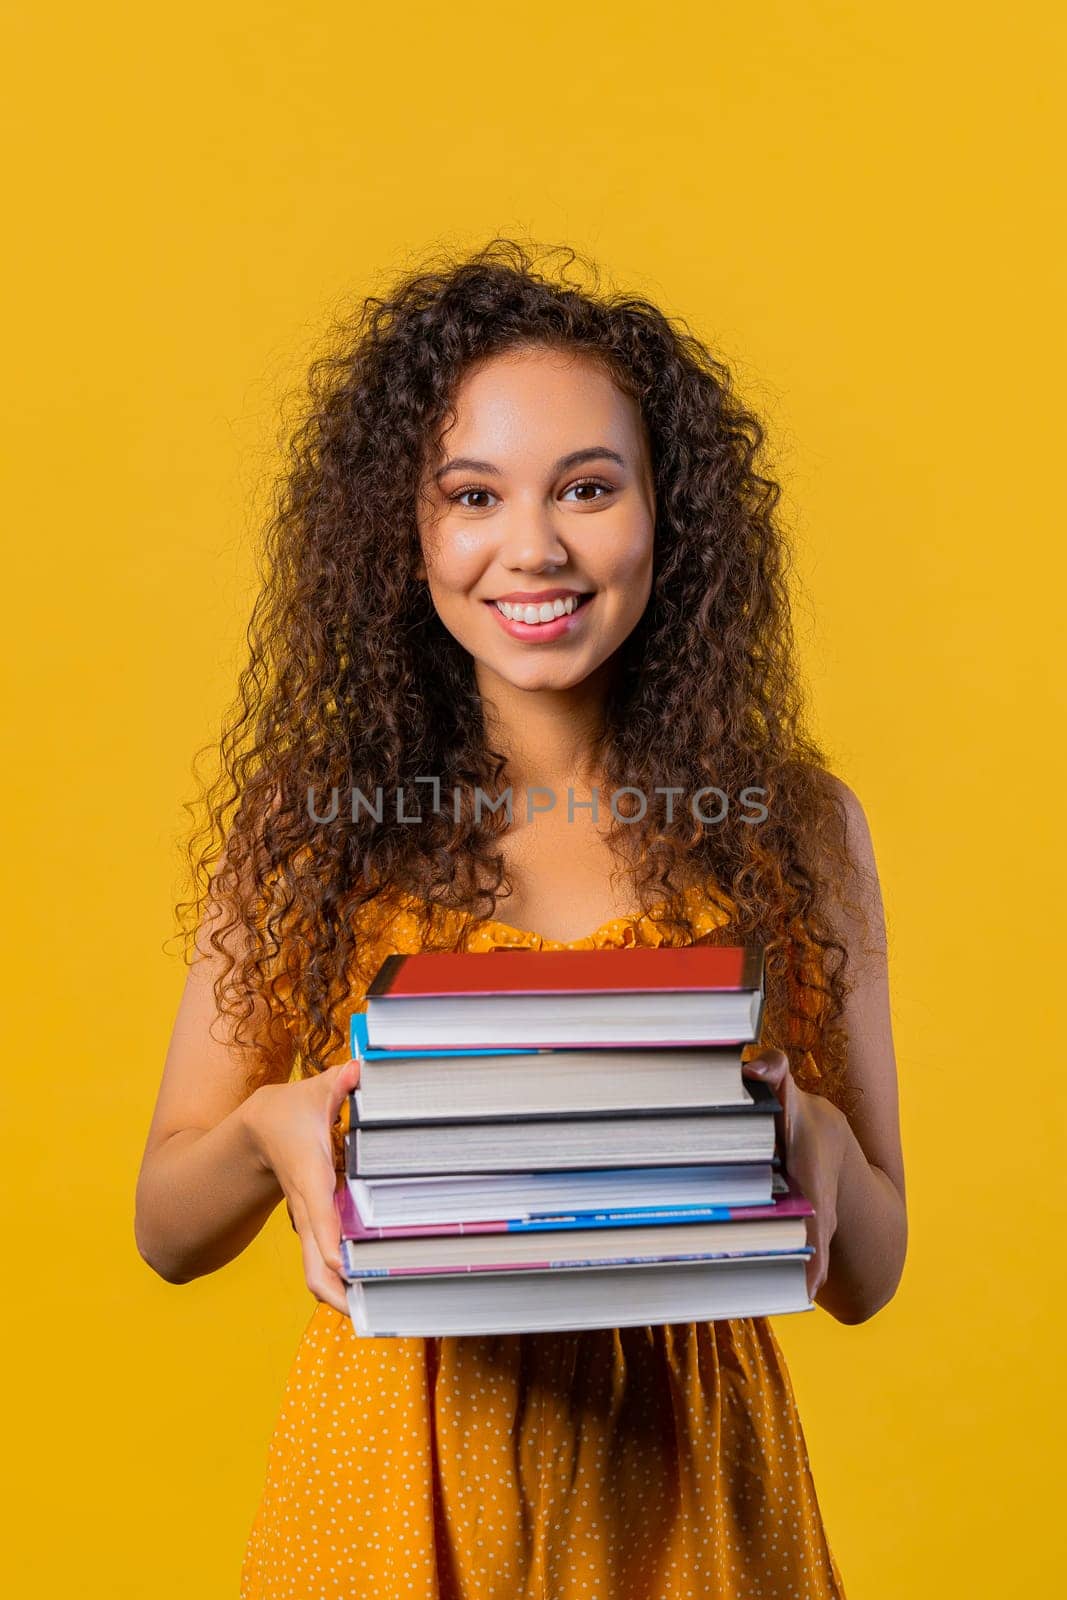 Smiling adult student woman with stack of books from library, yellow background by kristina_kokhanova